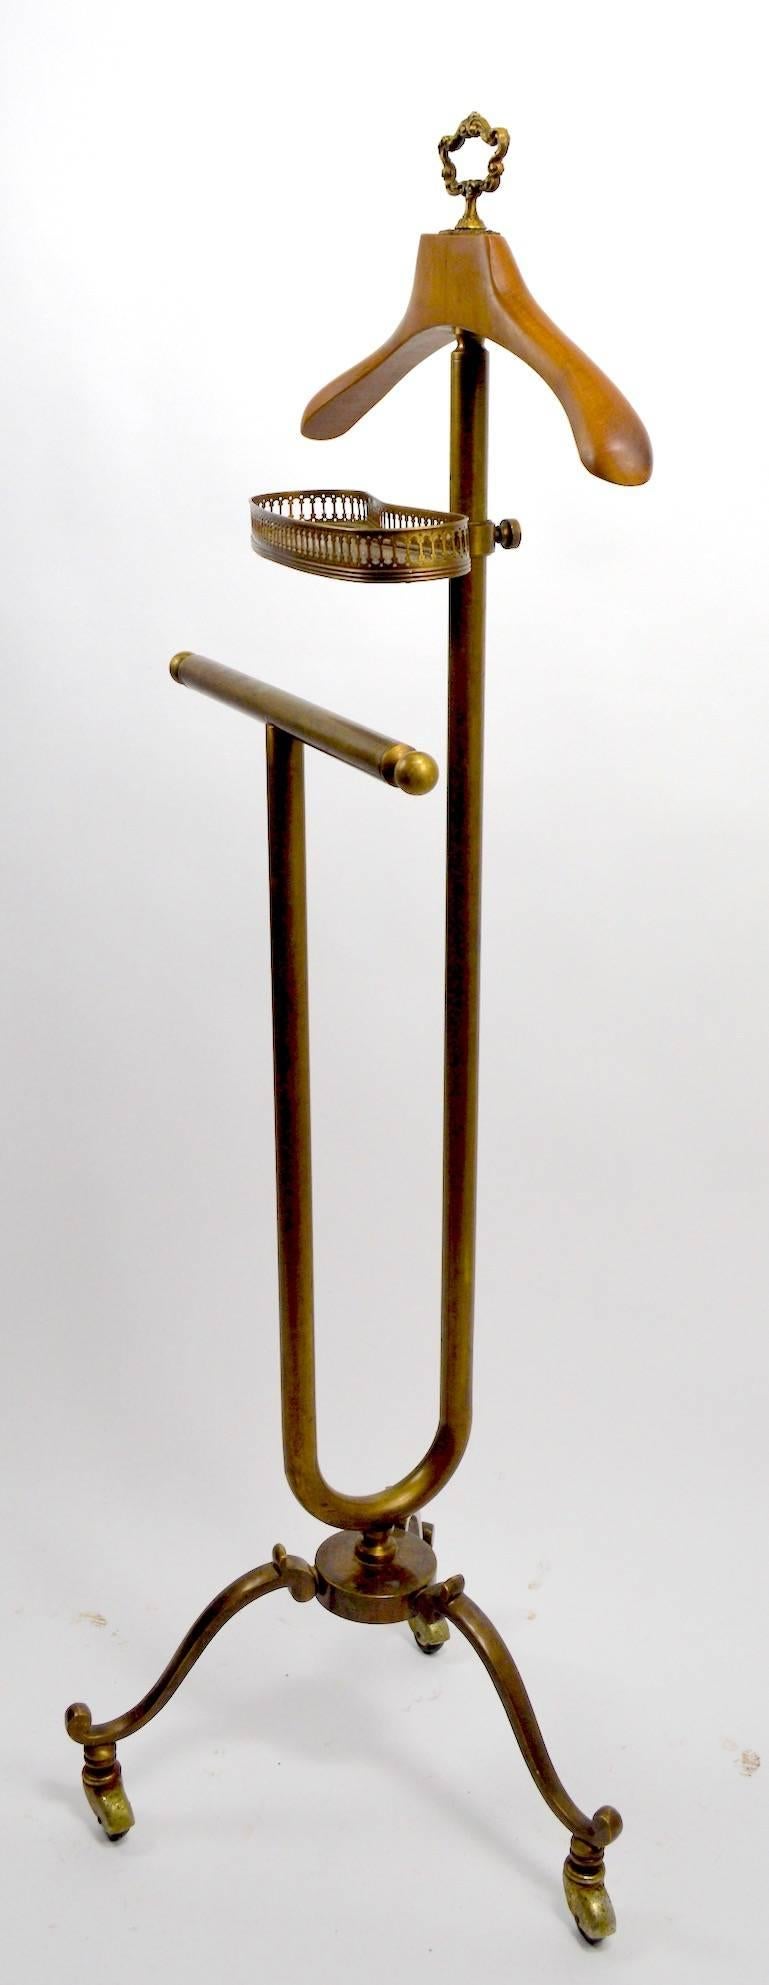 Classy brass and maple valet, dressing stand, silent butler, with adjustable change, key tray, on tri-part leg stand. Manufacture attributed to Maison Jansen, Italy, circa 1970s. Measures: Height of lower rod 33